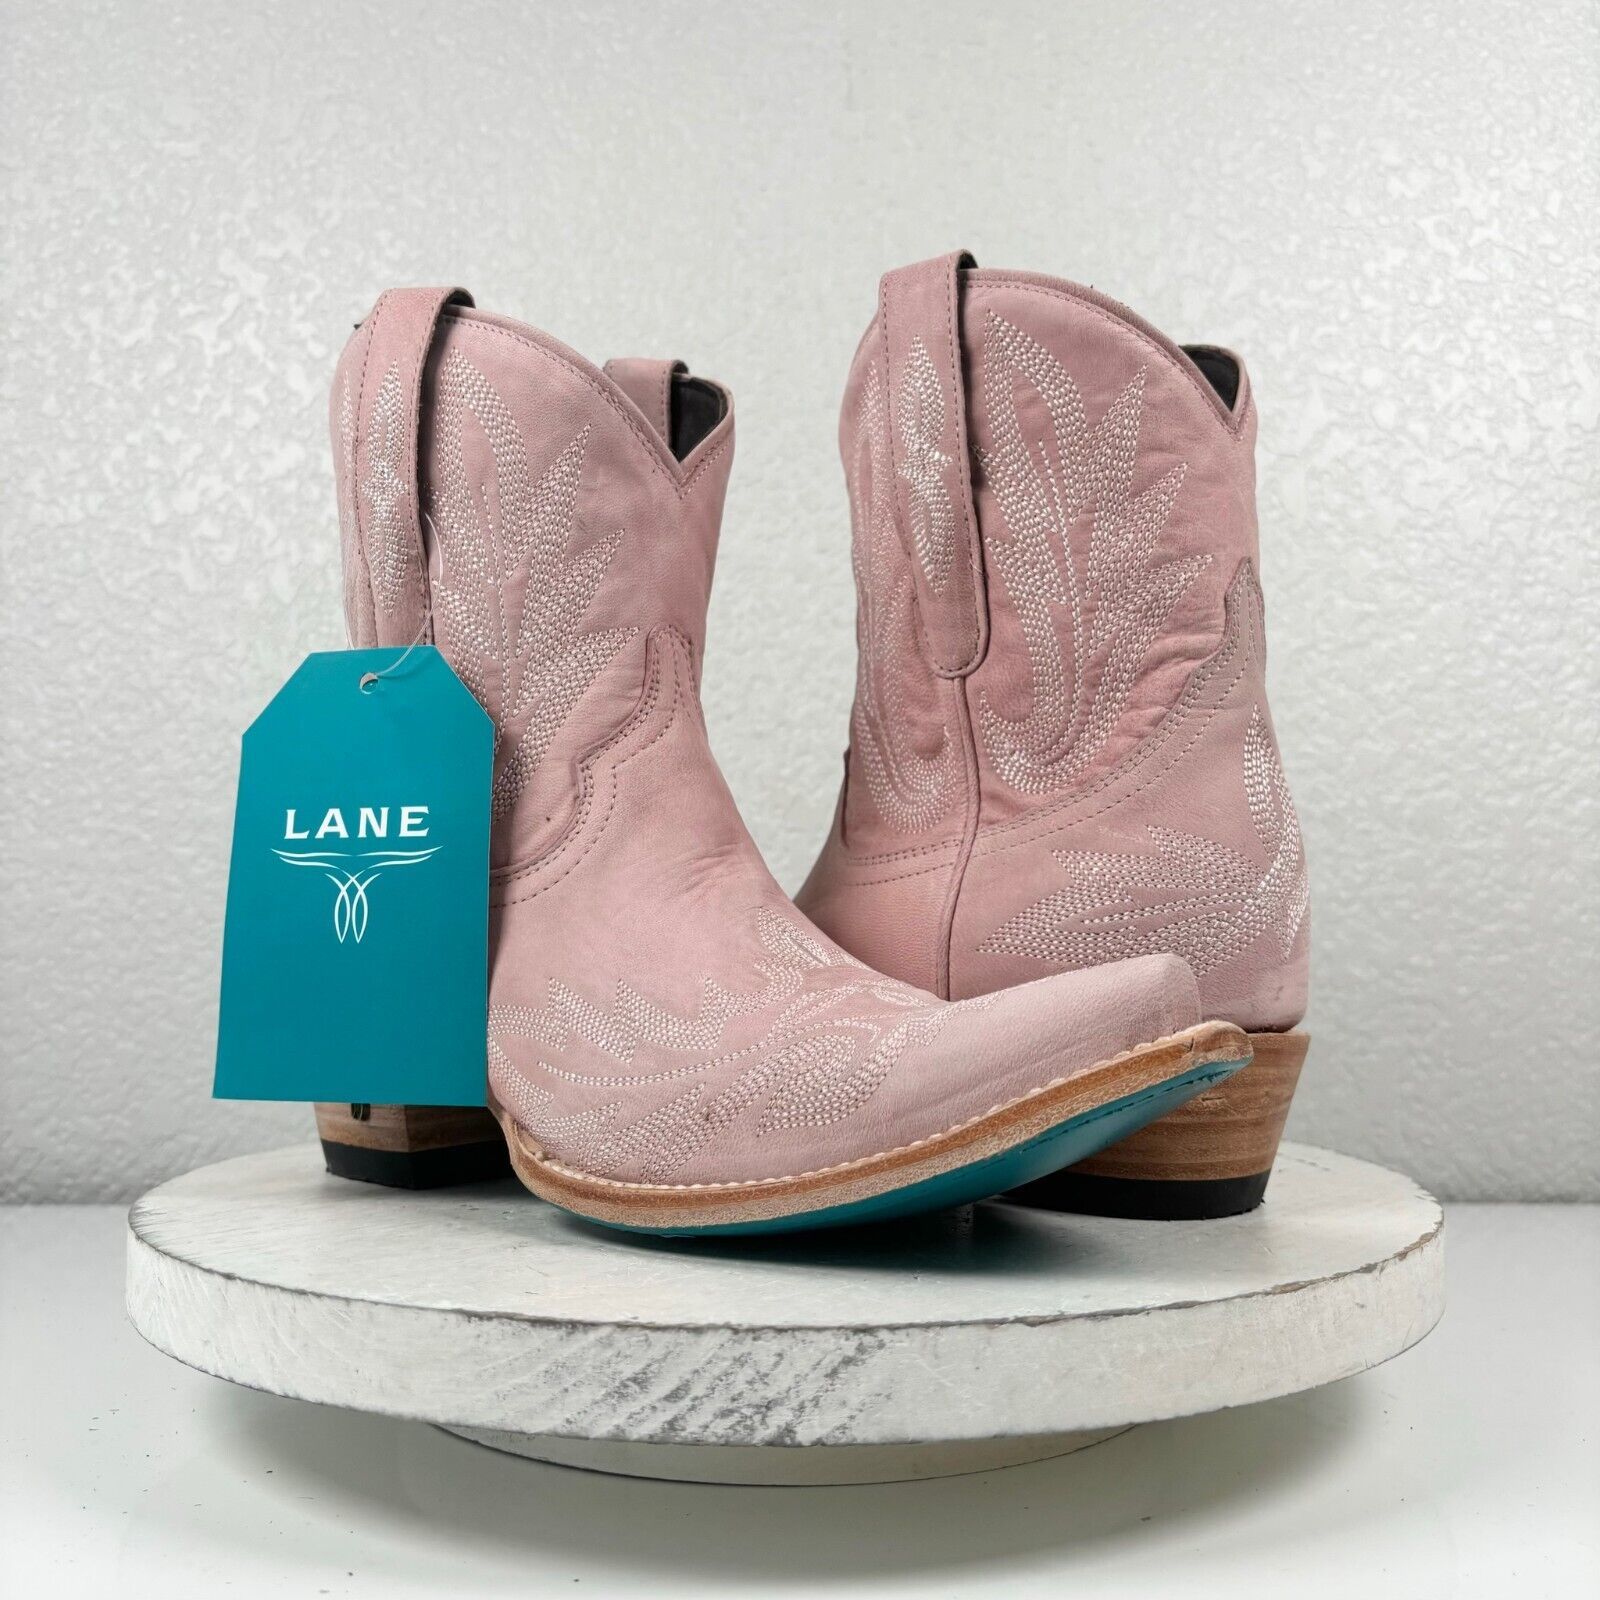 Primary image for Lane LEXINGTON Pink Cowboy Boots 7.5 Leather Western Ankle Bootie Short Snip Toe